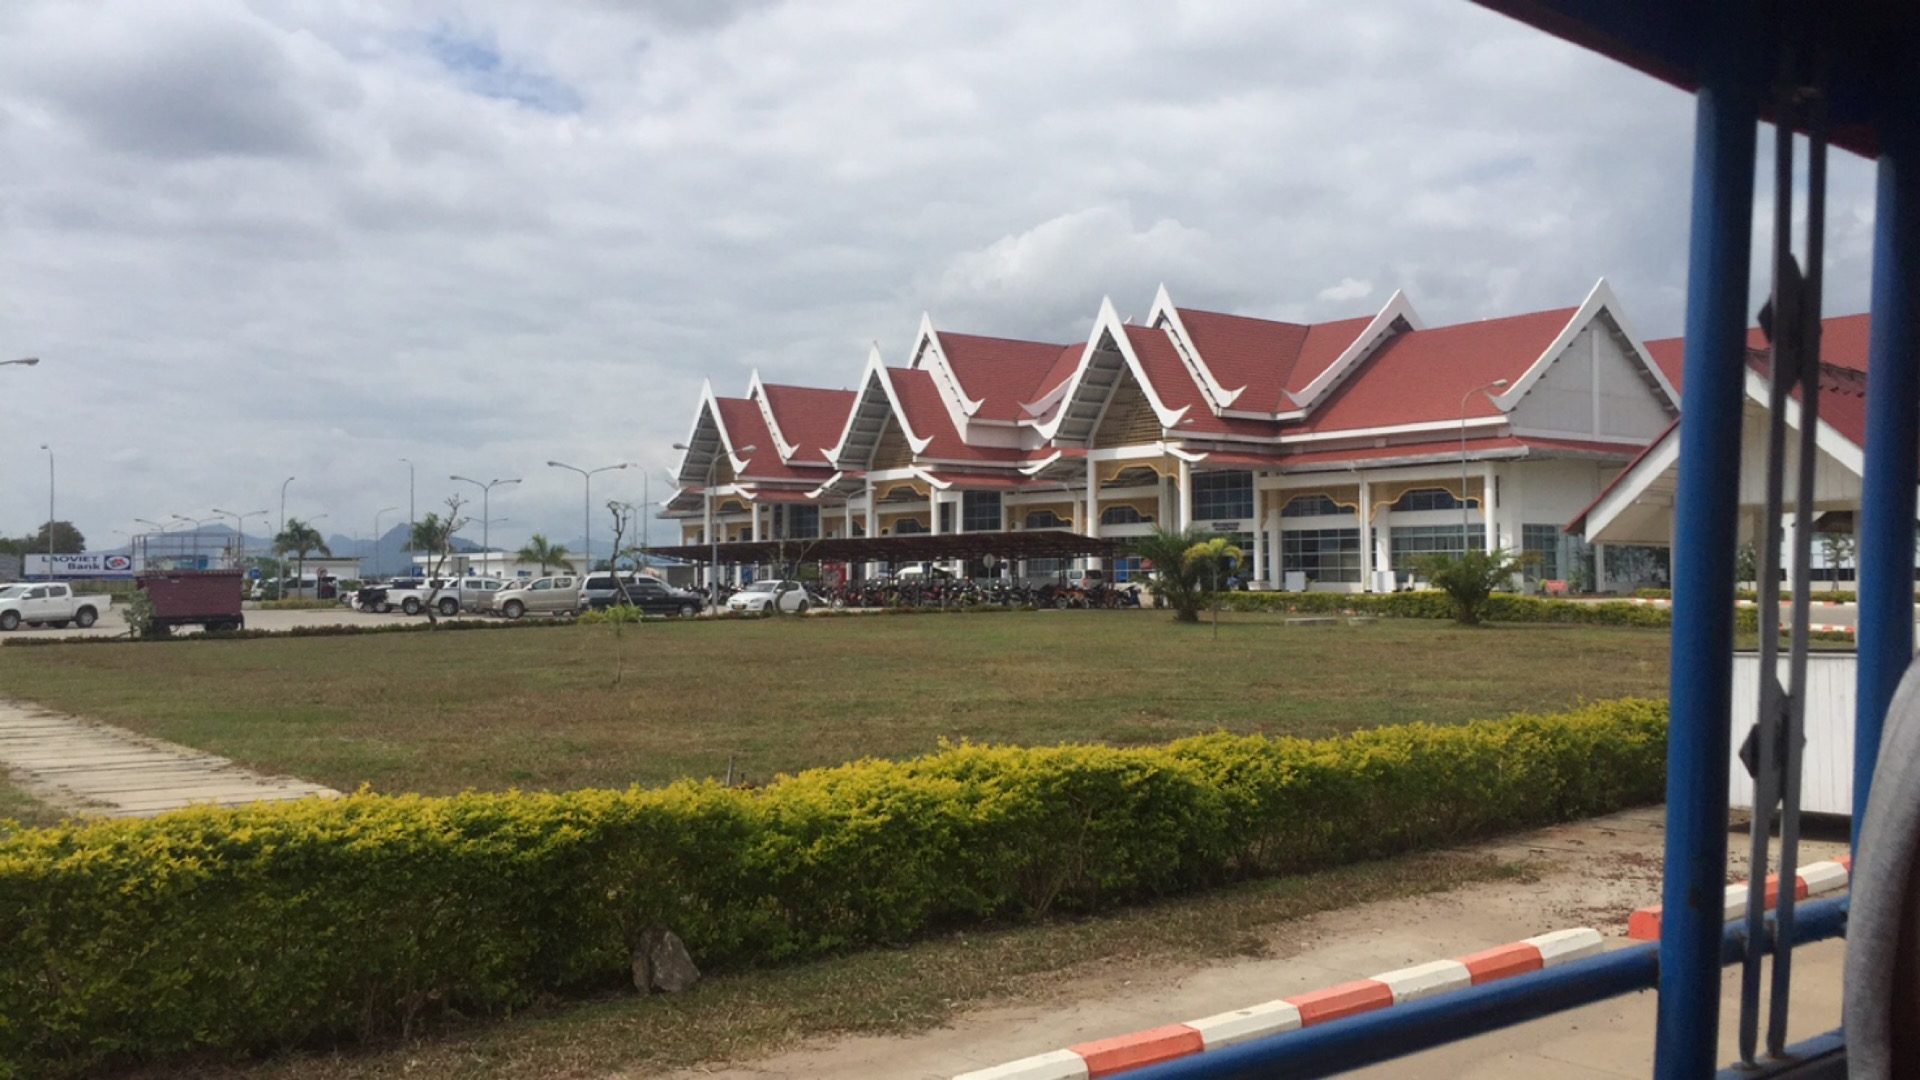 Airport in Laos. The day after tubing in Vang Vieng